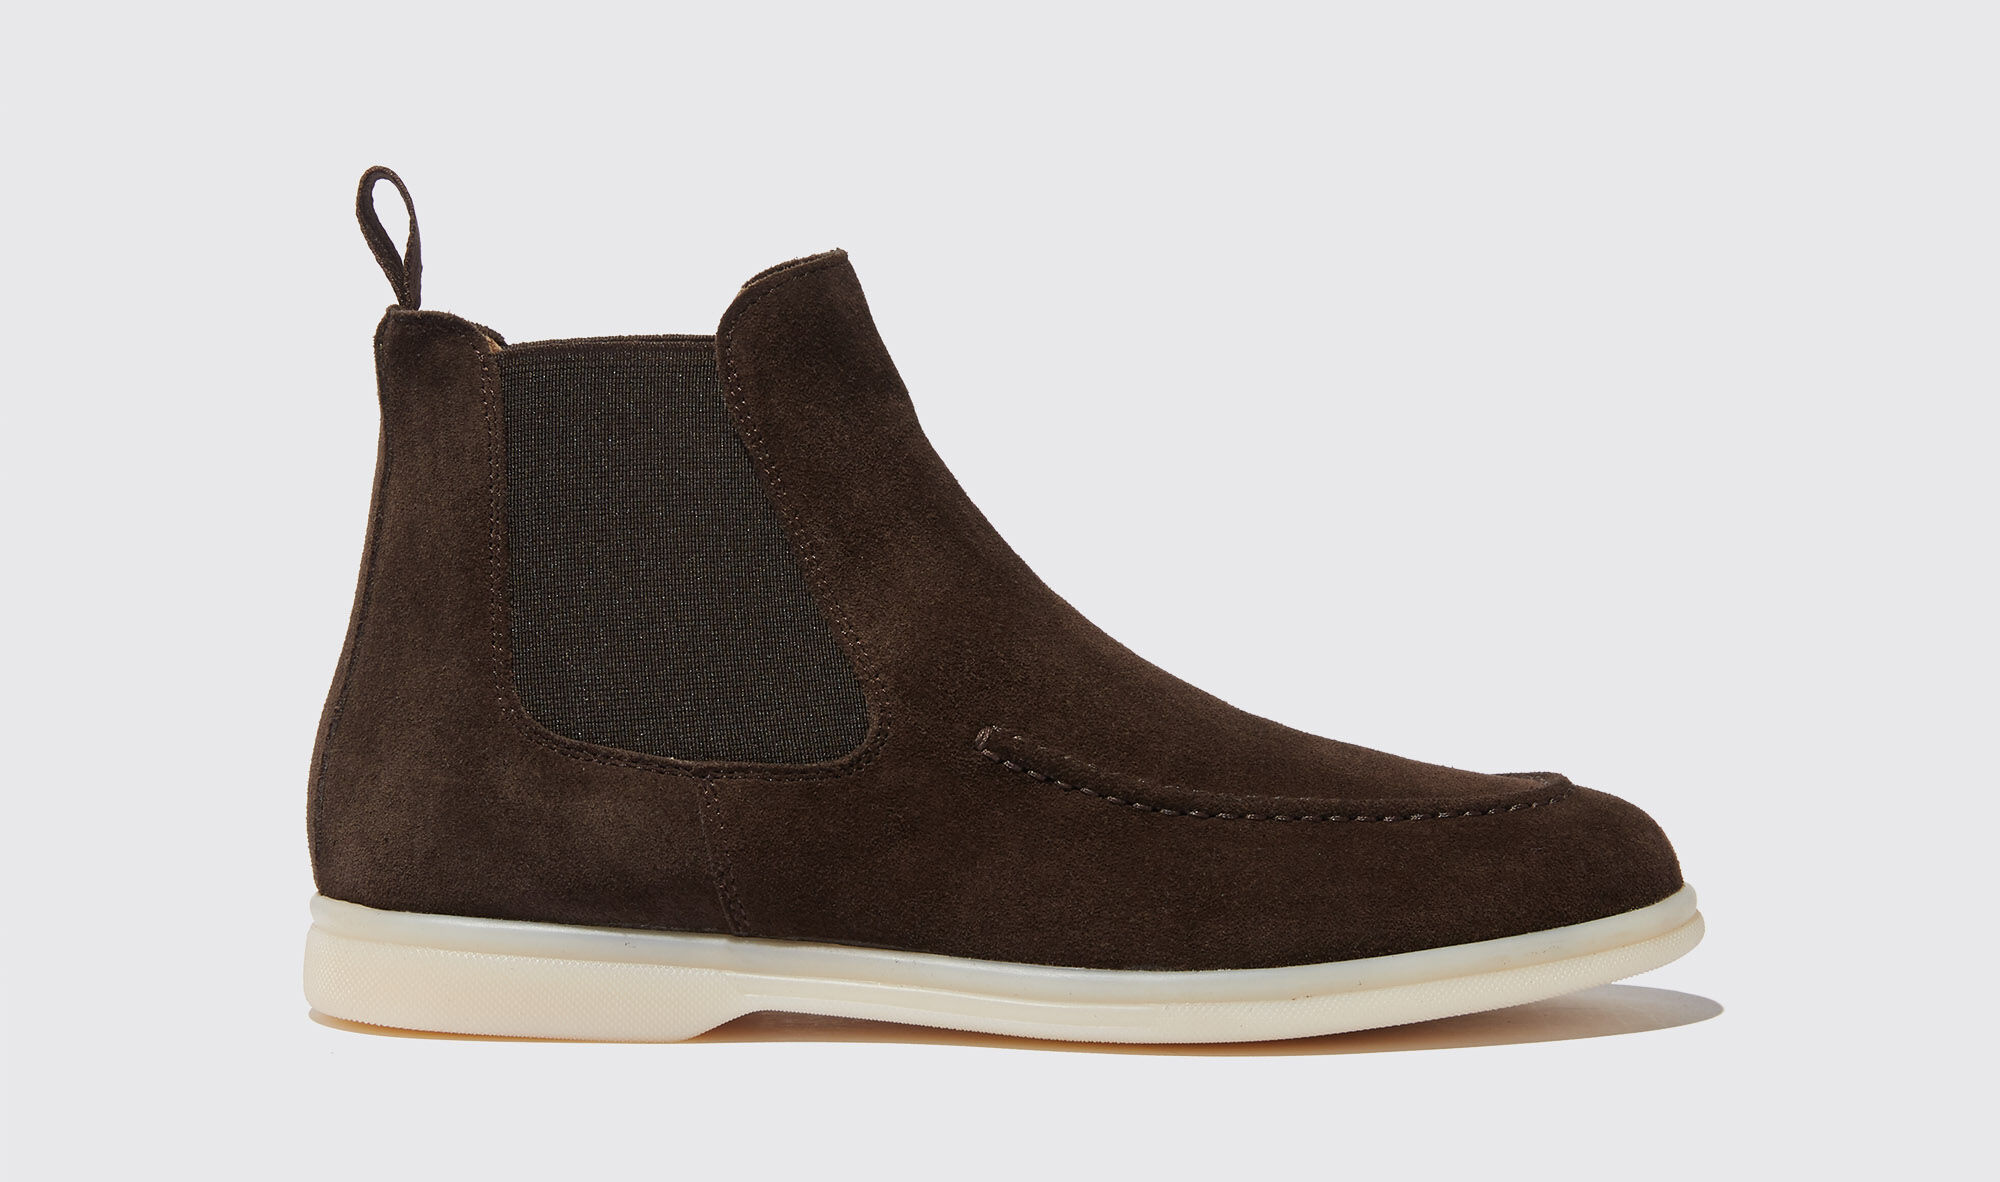 Scarosso Eugenia Moro Scamosciata - Donna Chelsea Boots Brown - Suede Leather 37